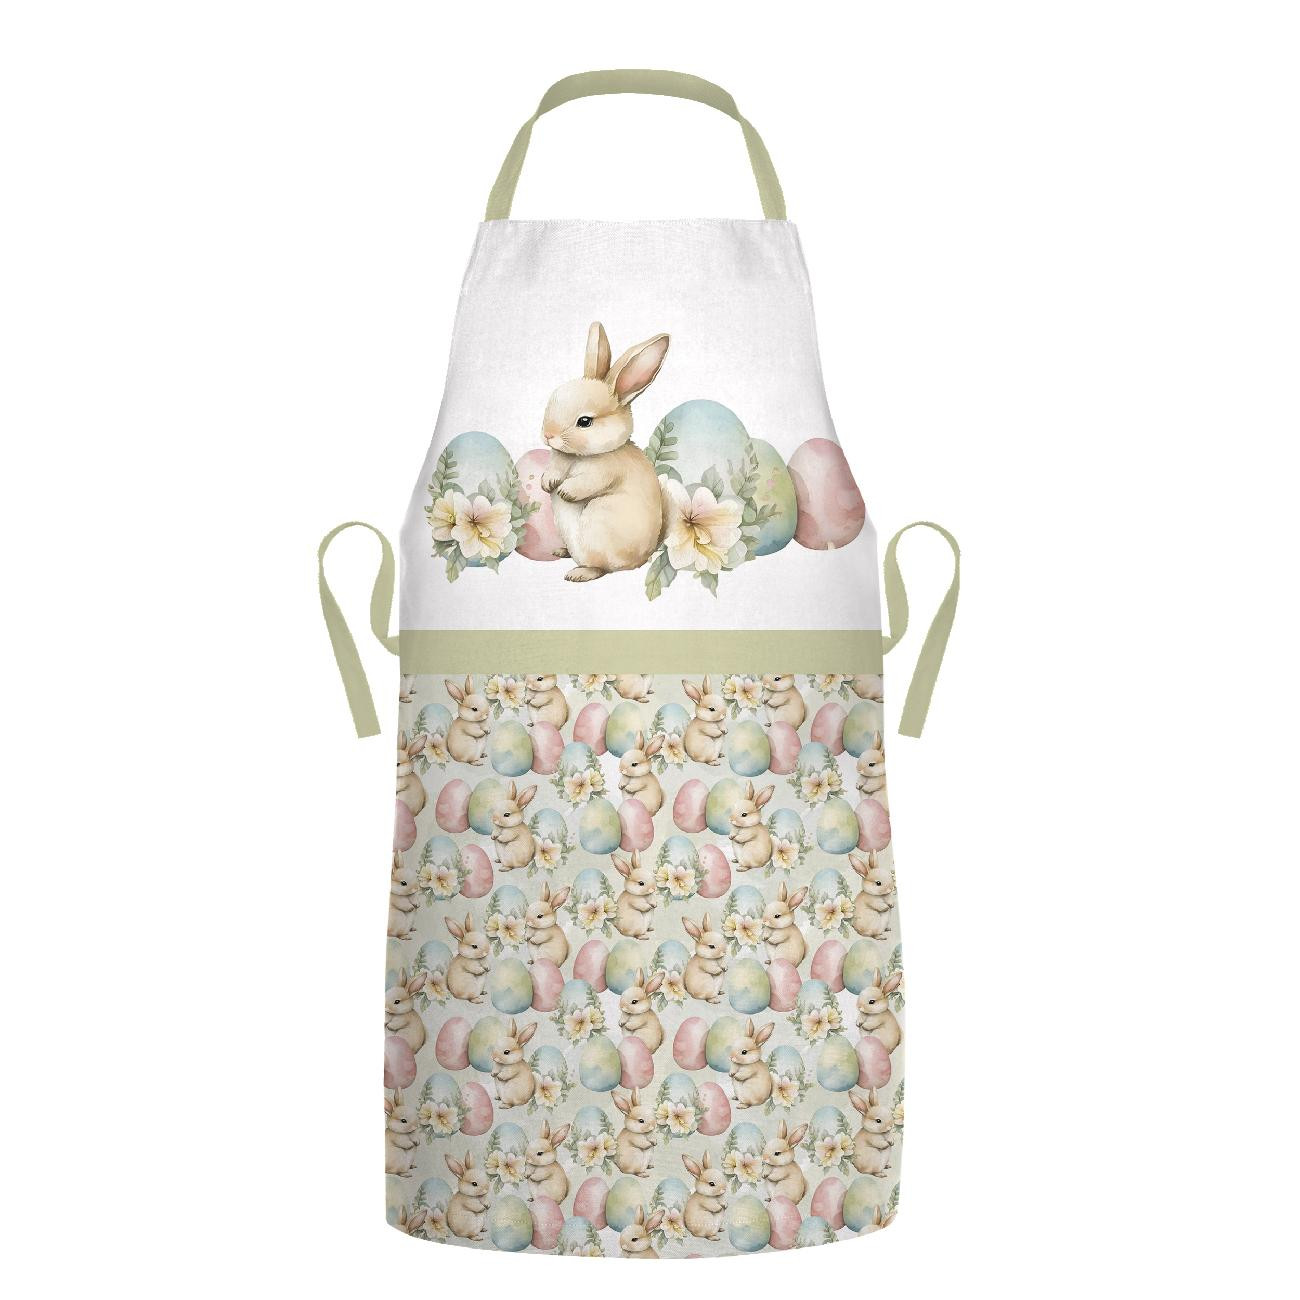 APRON - BUNNY EASTER PAT. 2 - sewing set